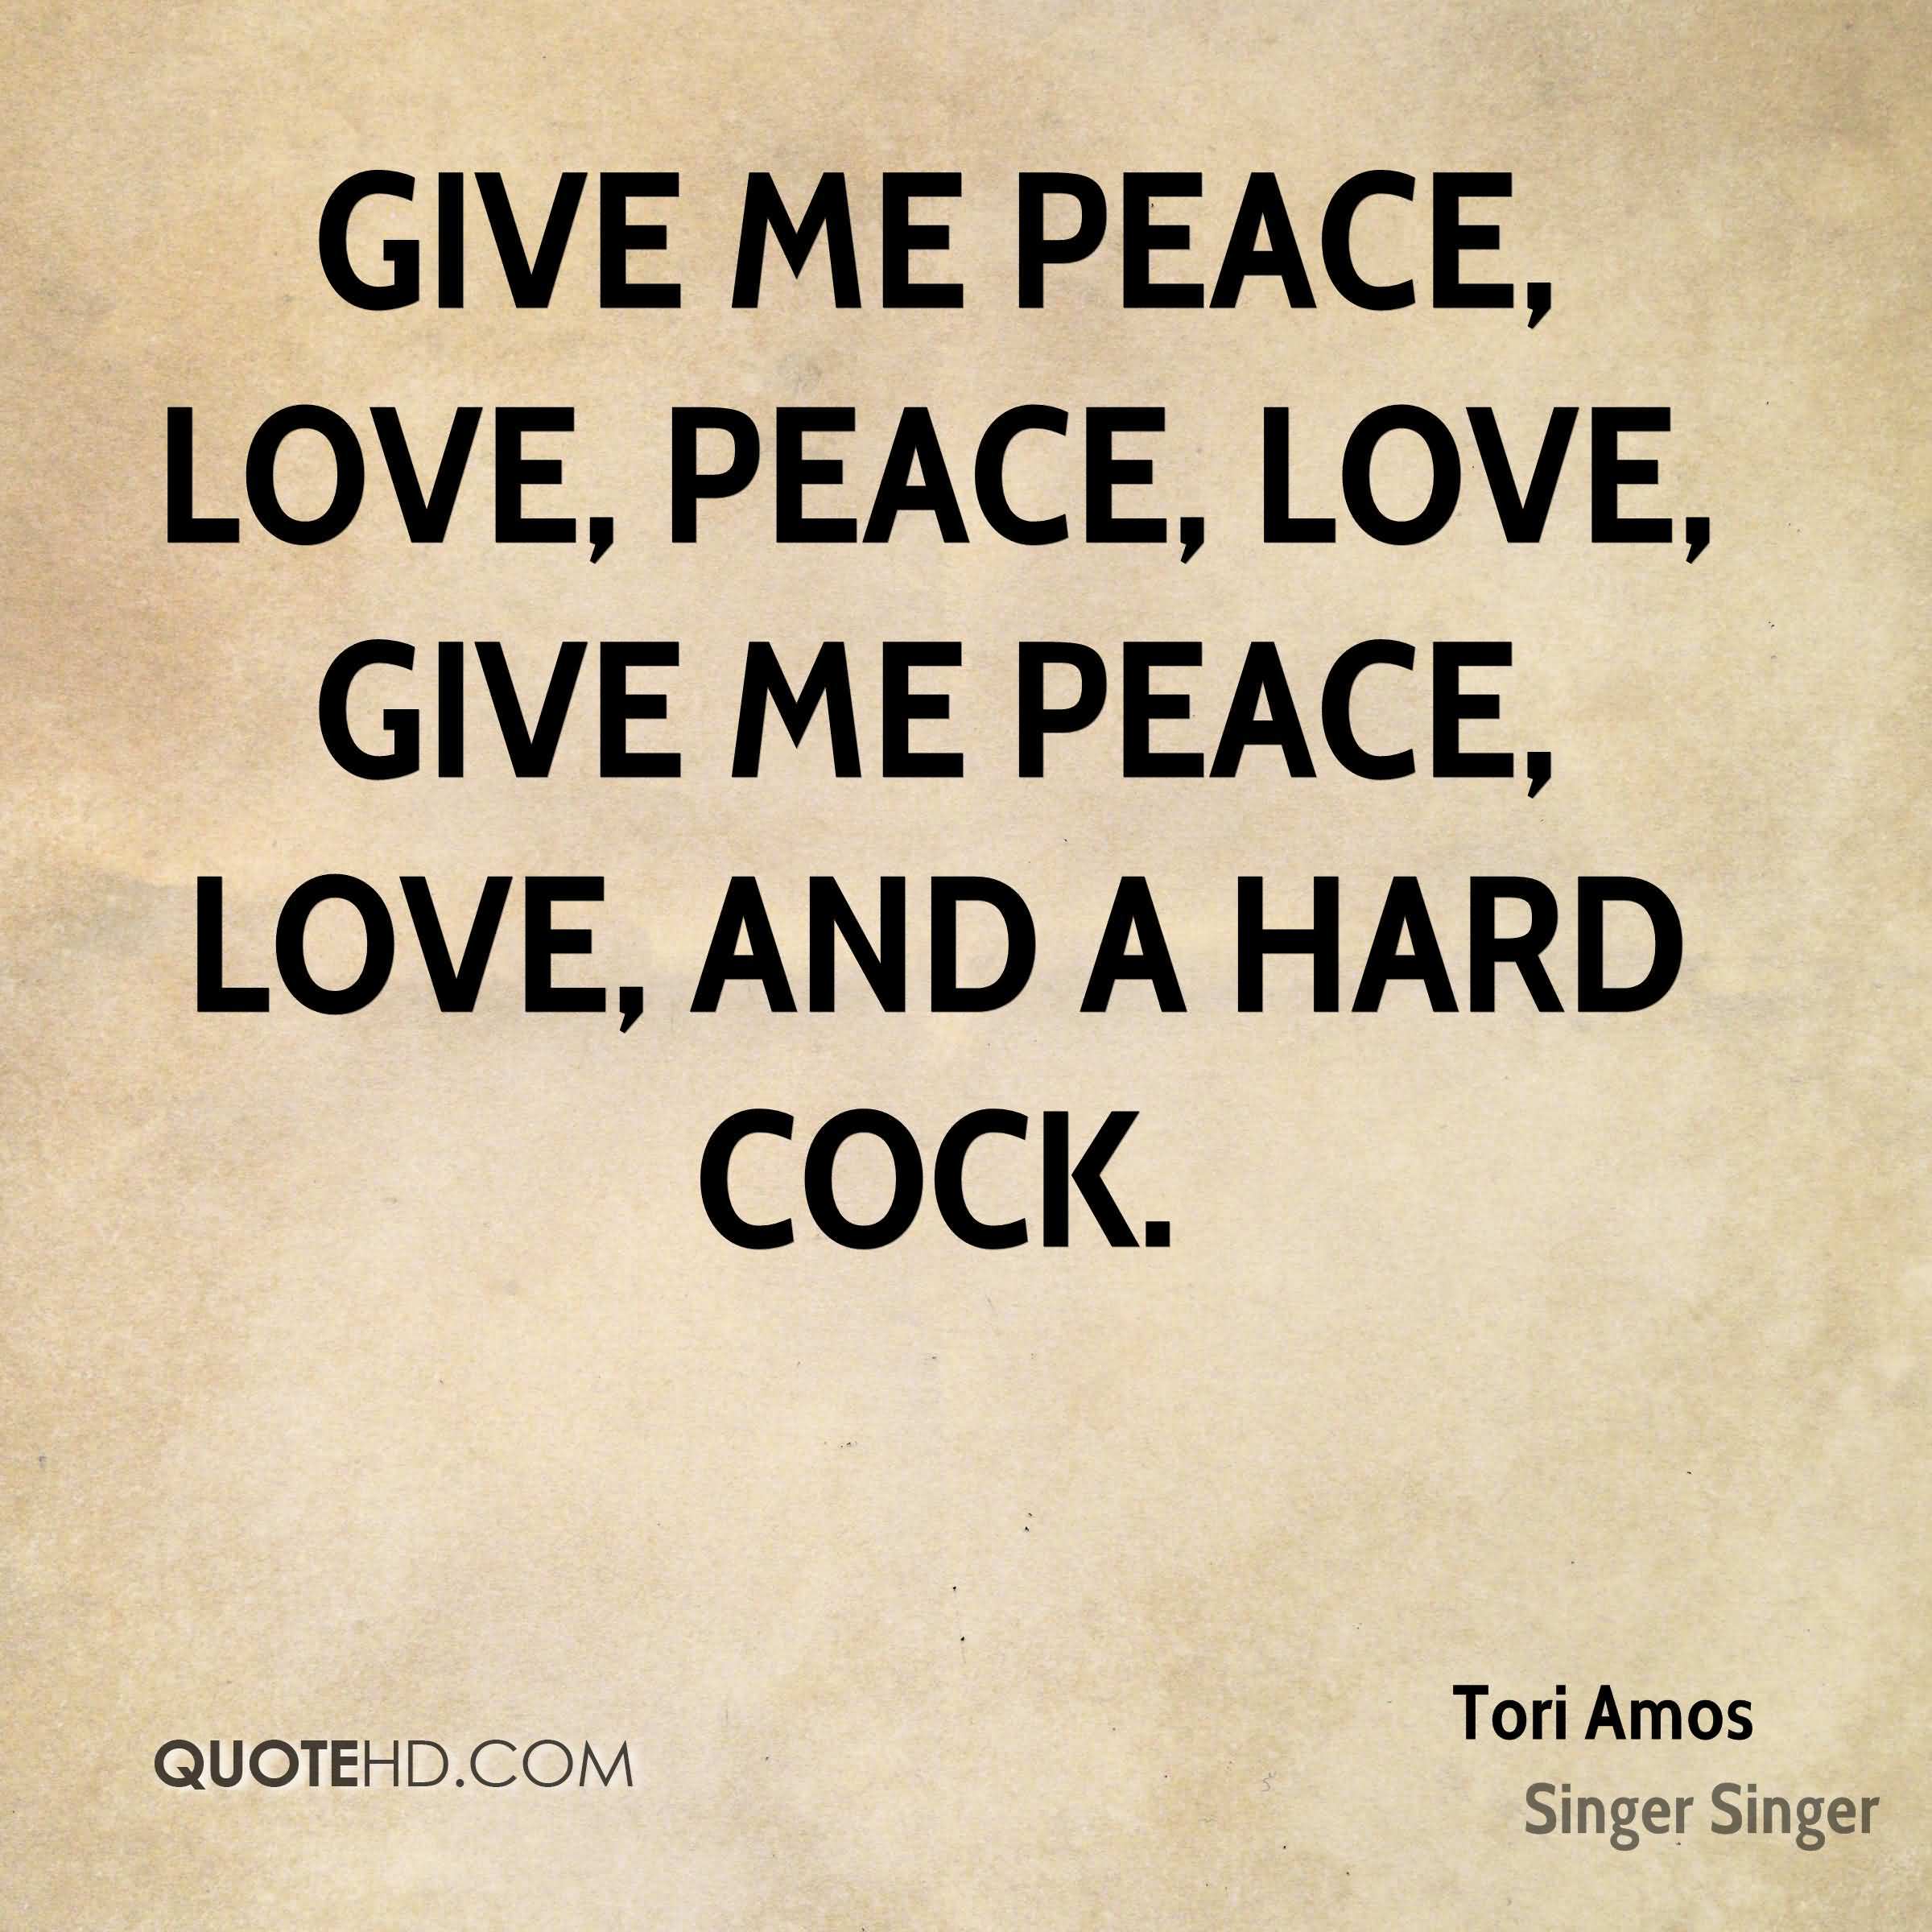 Quotes About Peace And Love 03